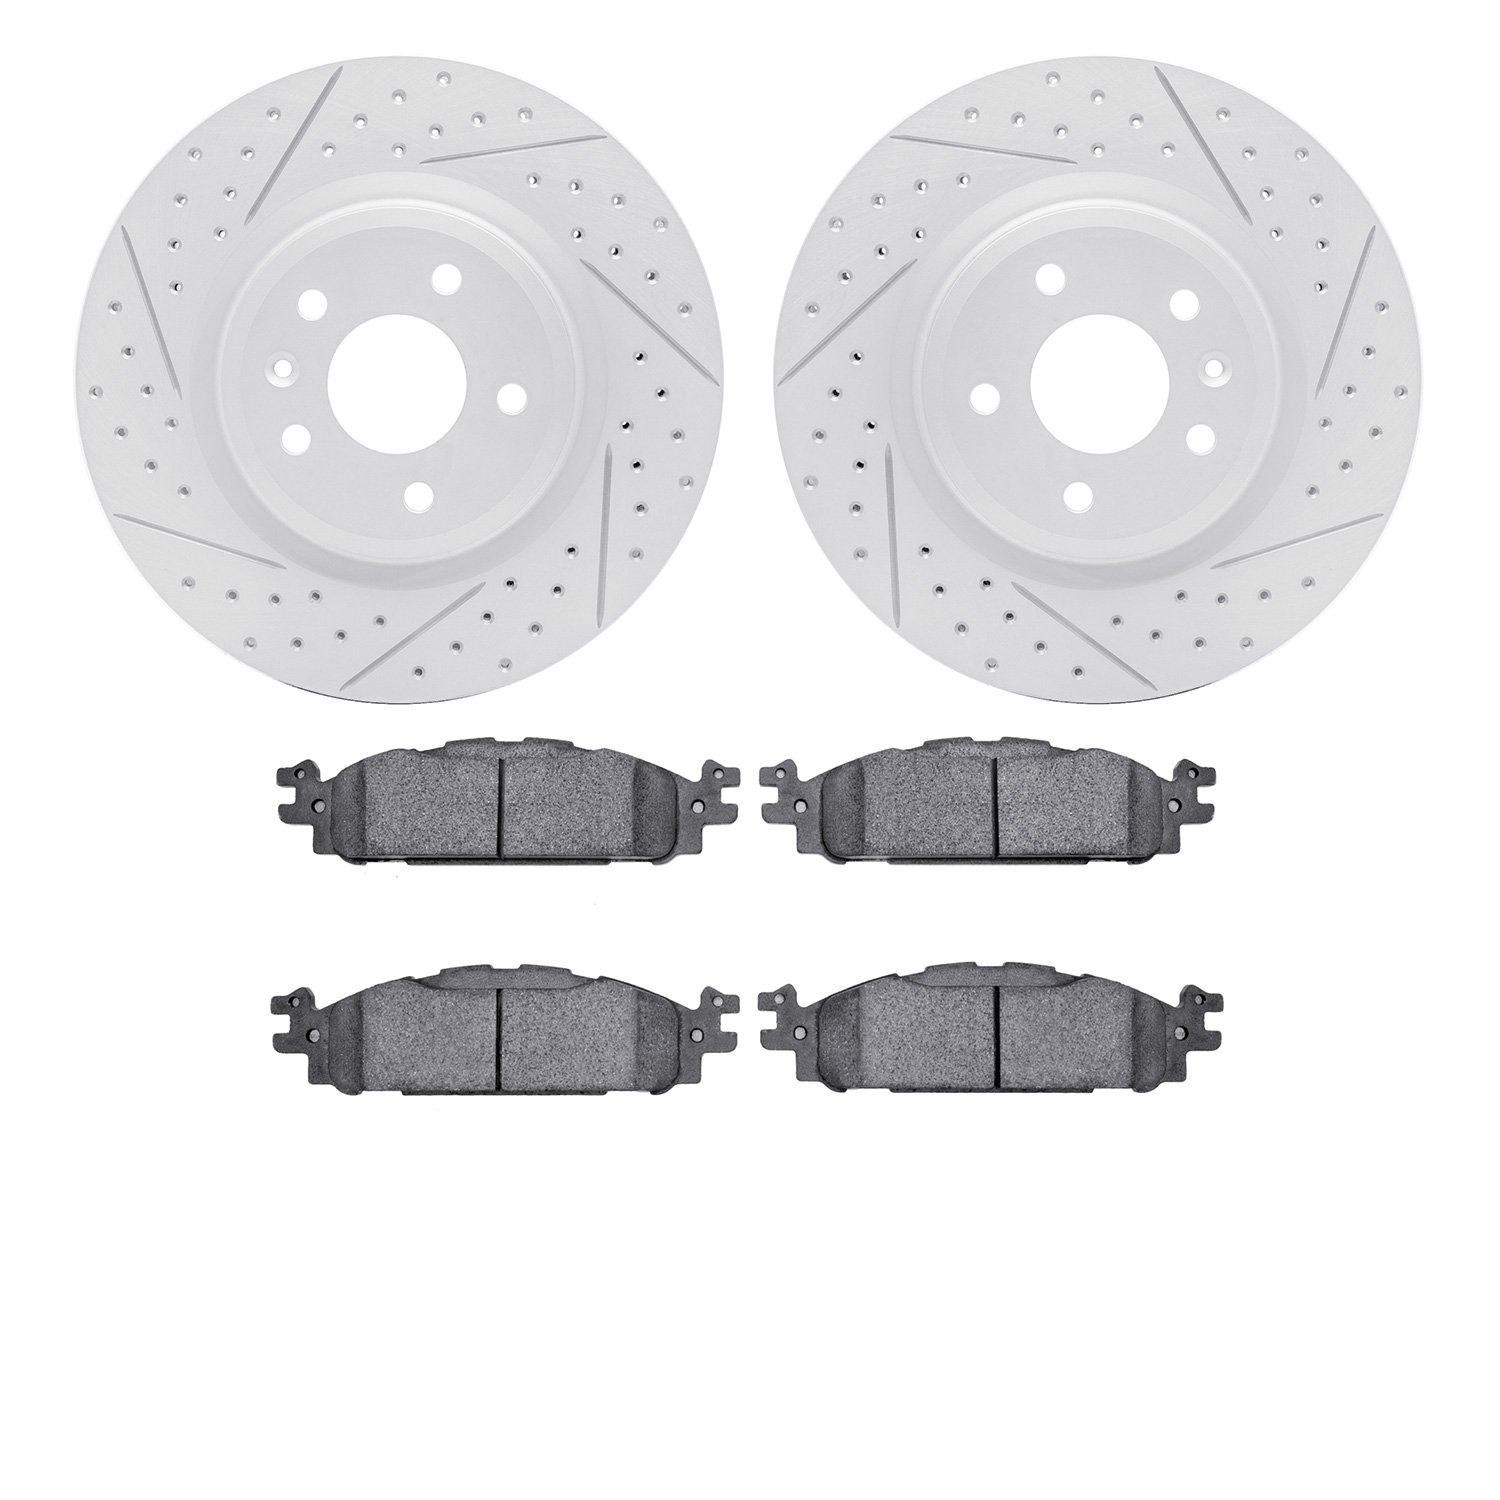 2502-54203 Geoperformance Drilled/Slotted Rotors w/5000 Advanced Brake Pads Kit, 2009-2010 Ford/Lincoln/Mercury/Mazda, Position: